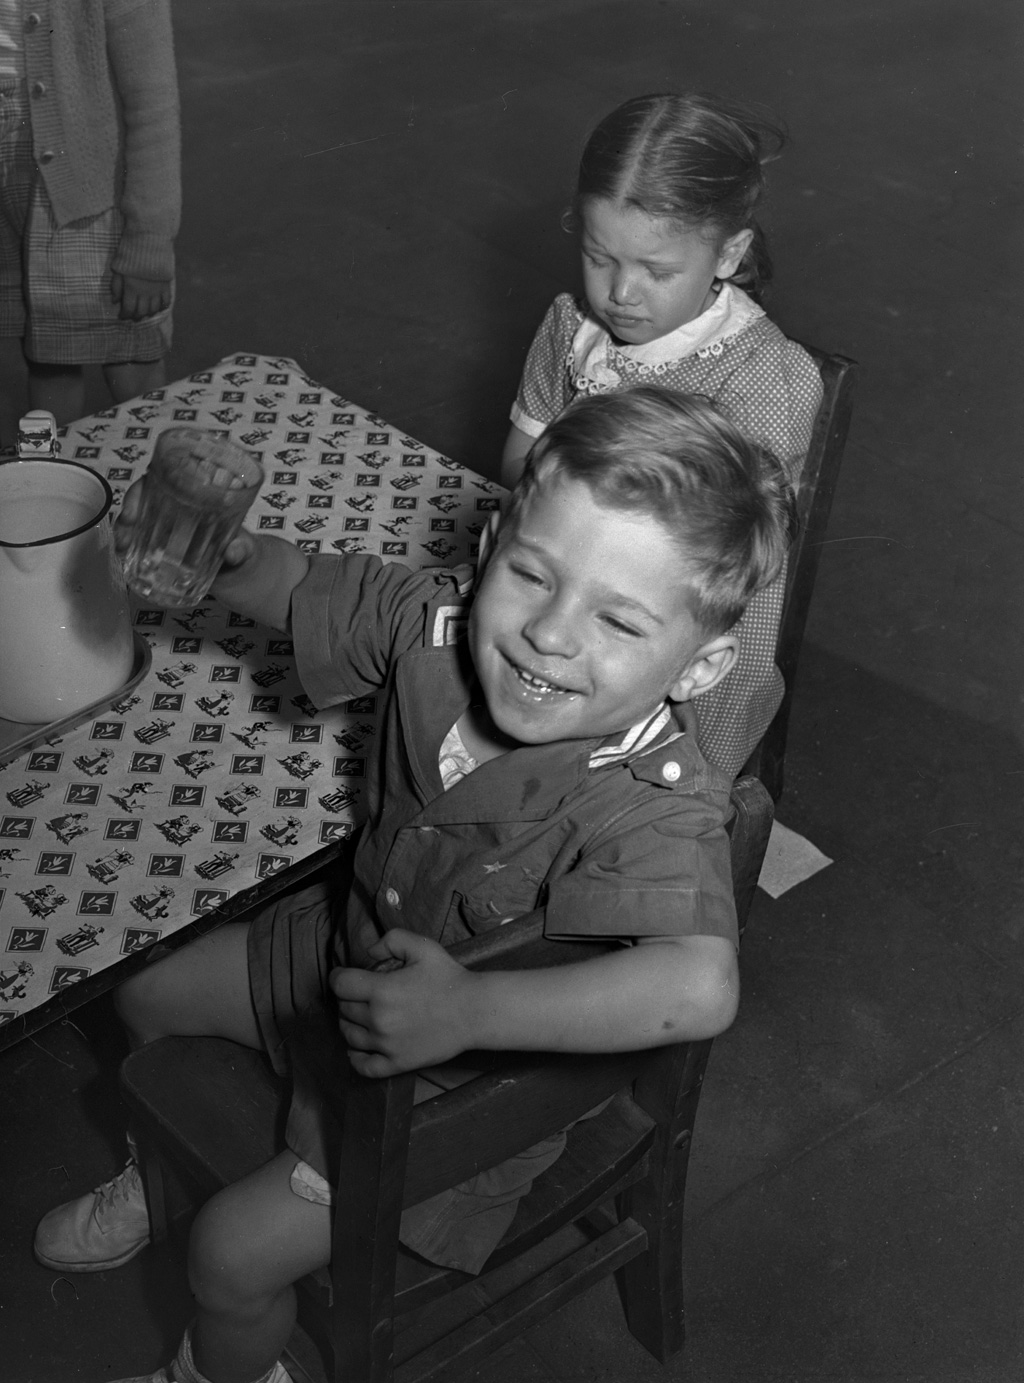 Children get milk or tomato juice after their nap at the nursery school at Queensbridge housing project in Queens, New York. Photograph by Arthur Rothstein, June 1942. View full size.